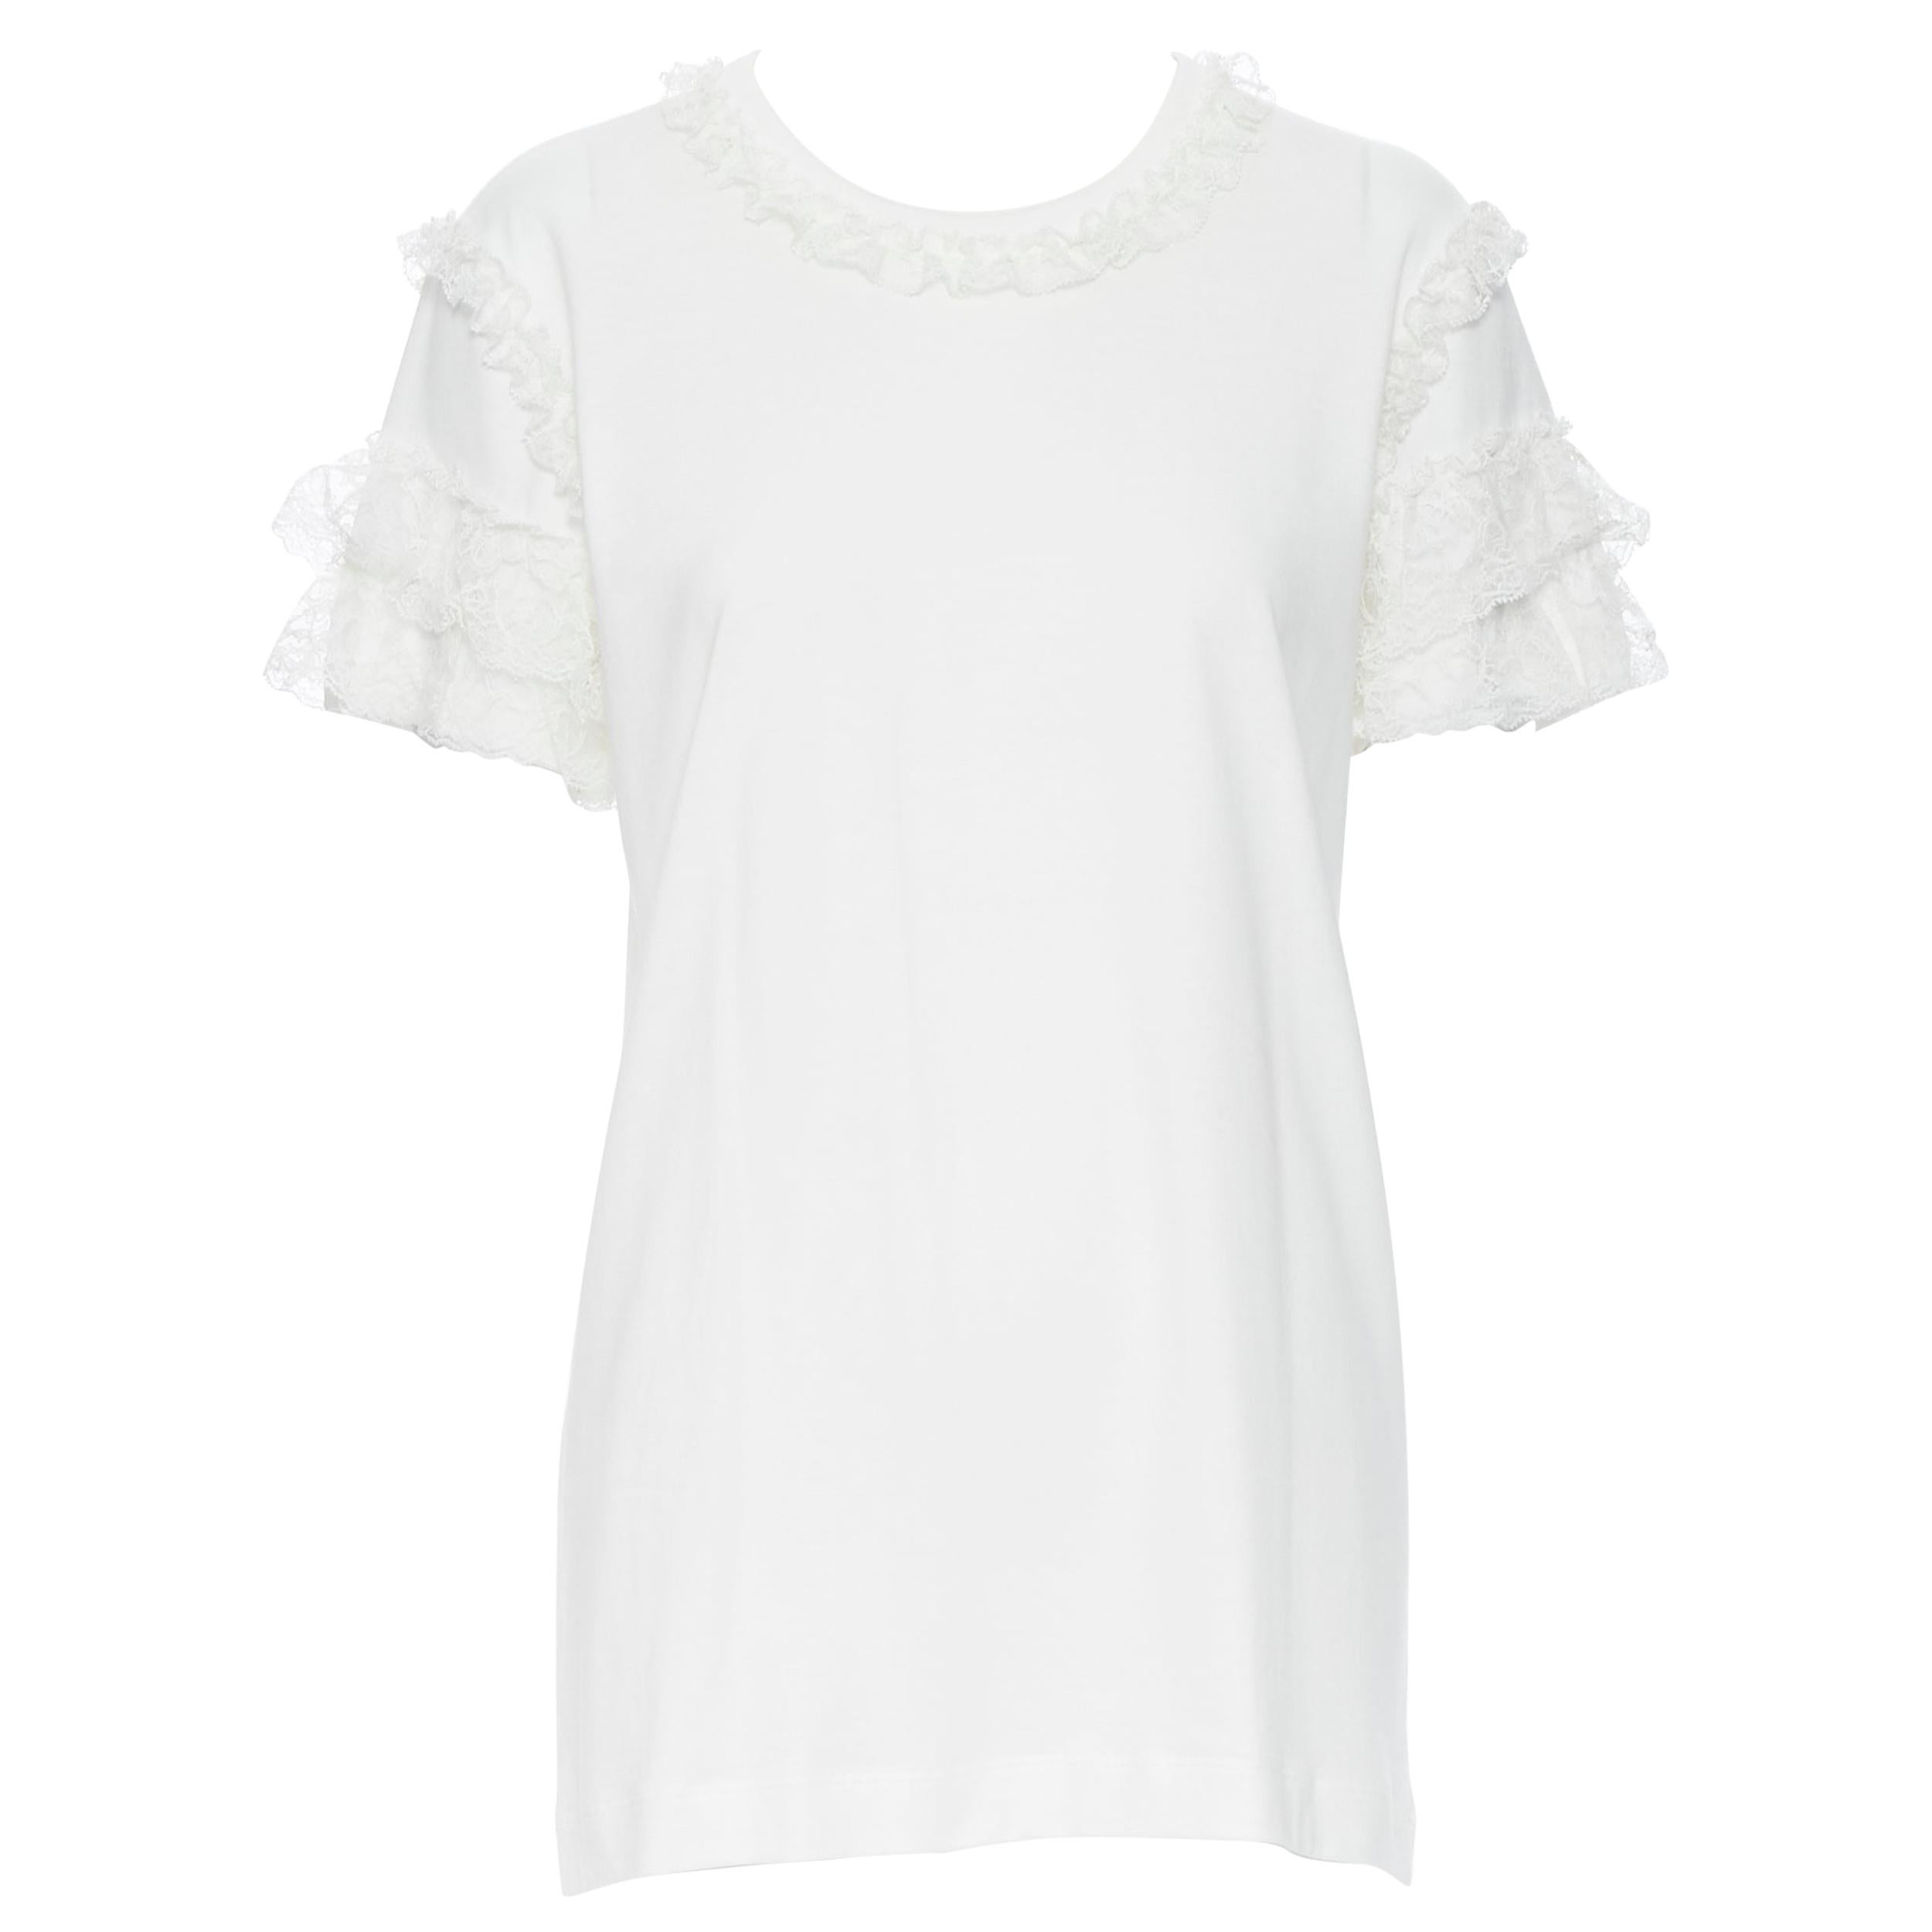 DOLCE GABBANA white cotton floral lace ruffle short sleeve t-shirt top IT40
Brand: Dolce Gabanna
Model Name / Style: Lace polo
Material: Cotton blend
Color: White
Pattern: Solid
Extra Detail: Lace ruffle trimming at neckline and sleeves.
Made in: